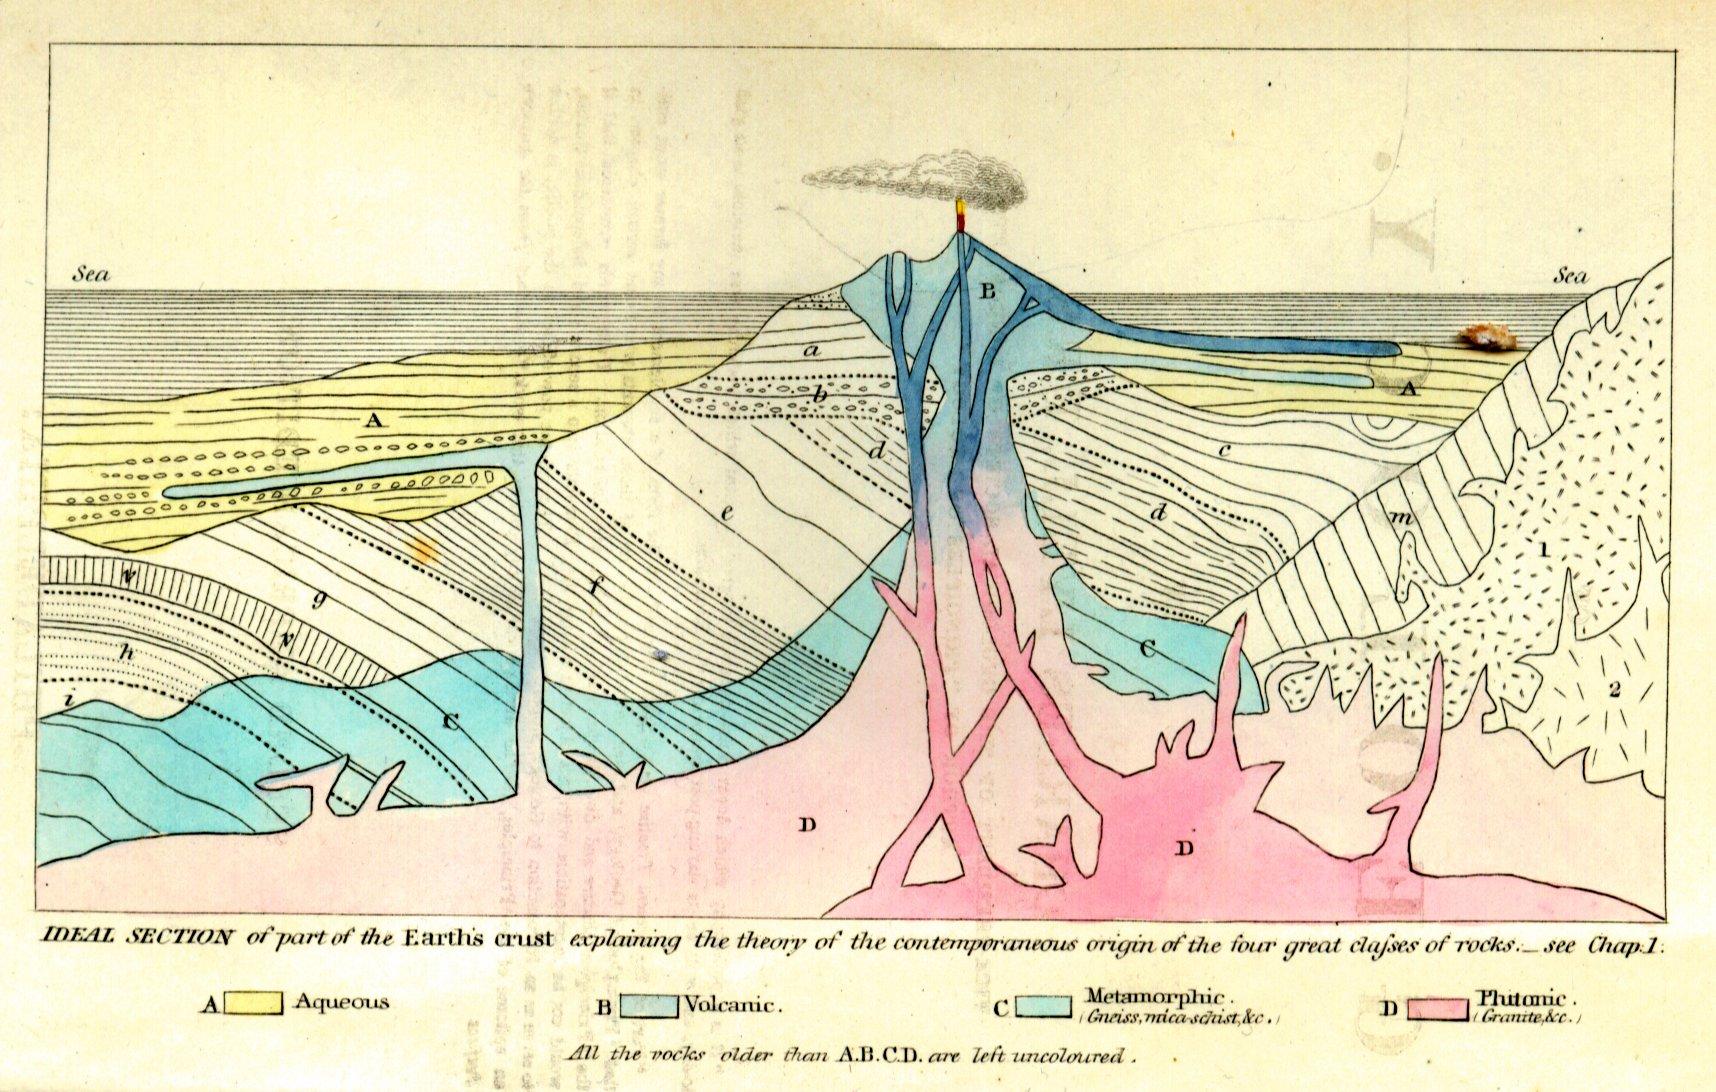 A cross-section of a volcanic eruption showing different types of rock that make up the volcano.